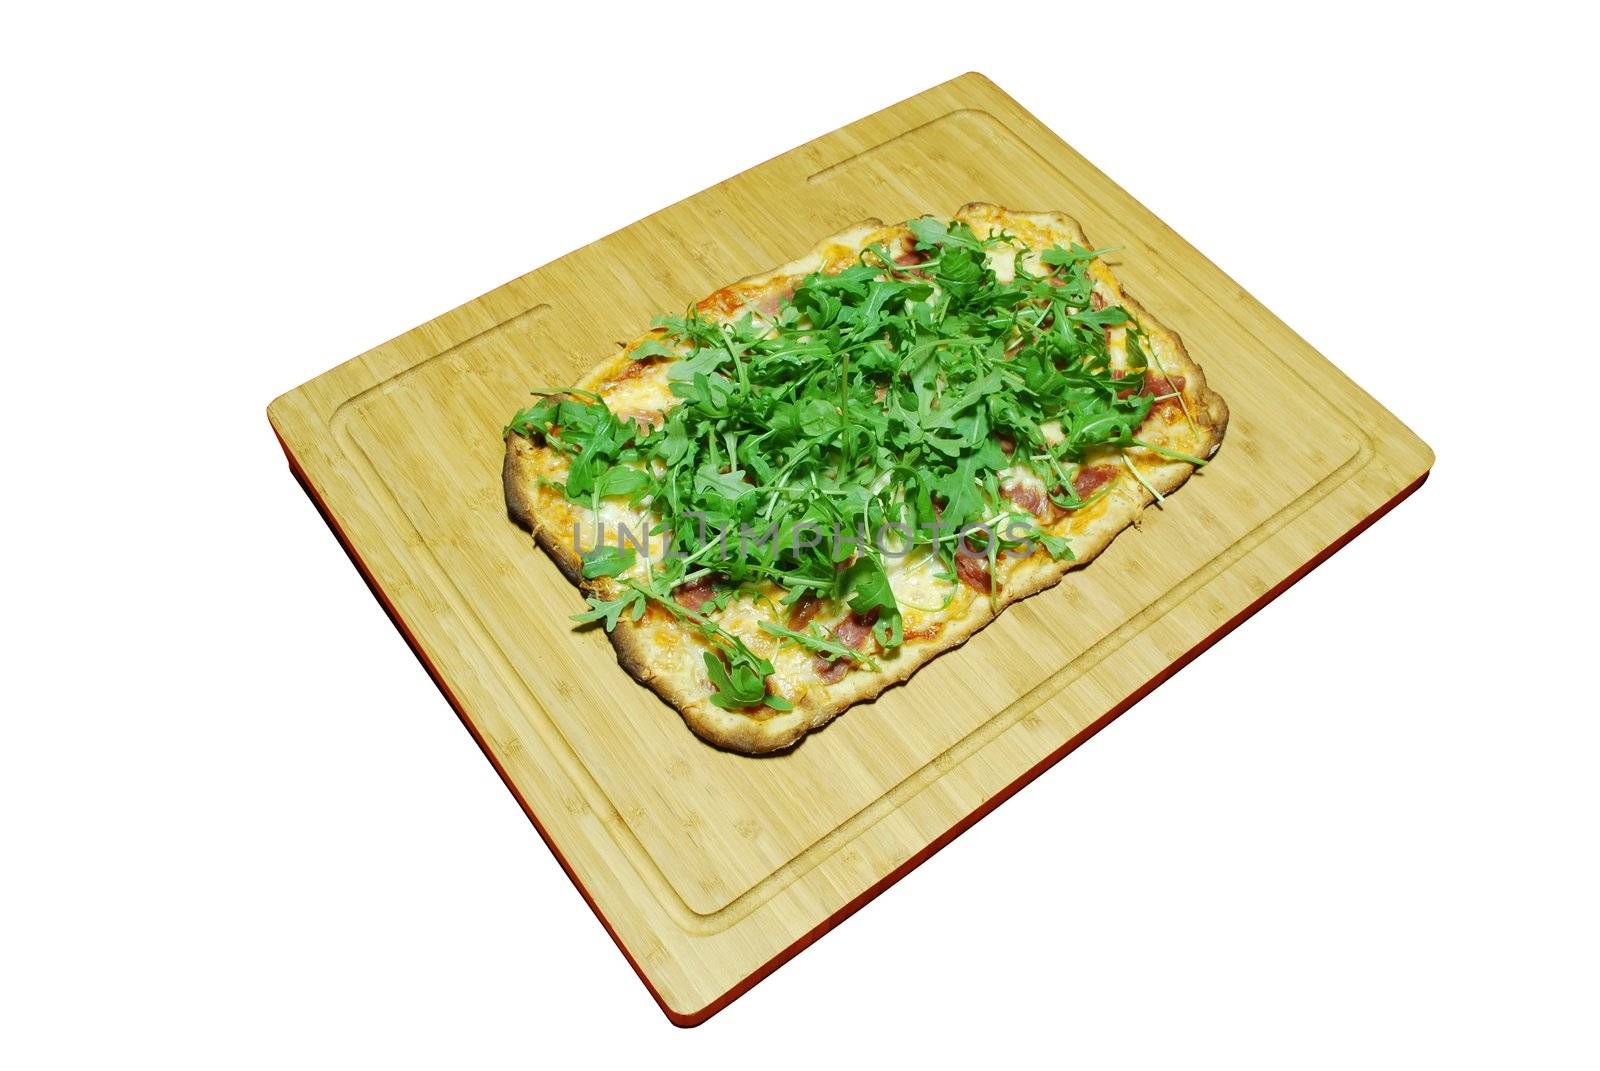 homemade pizza with 3 cheeses with prosciutto and arugula (over white) on wooden board